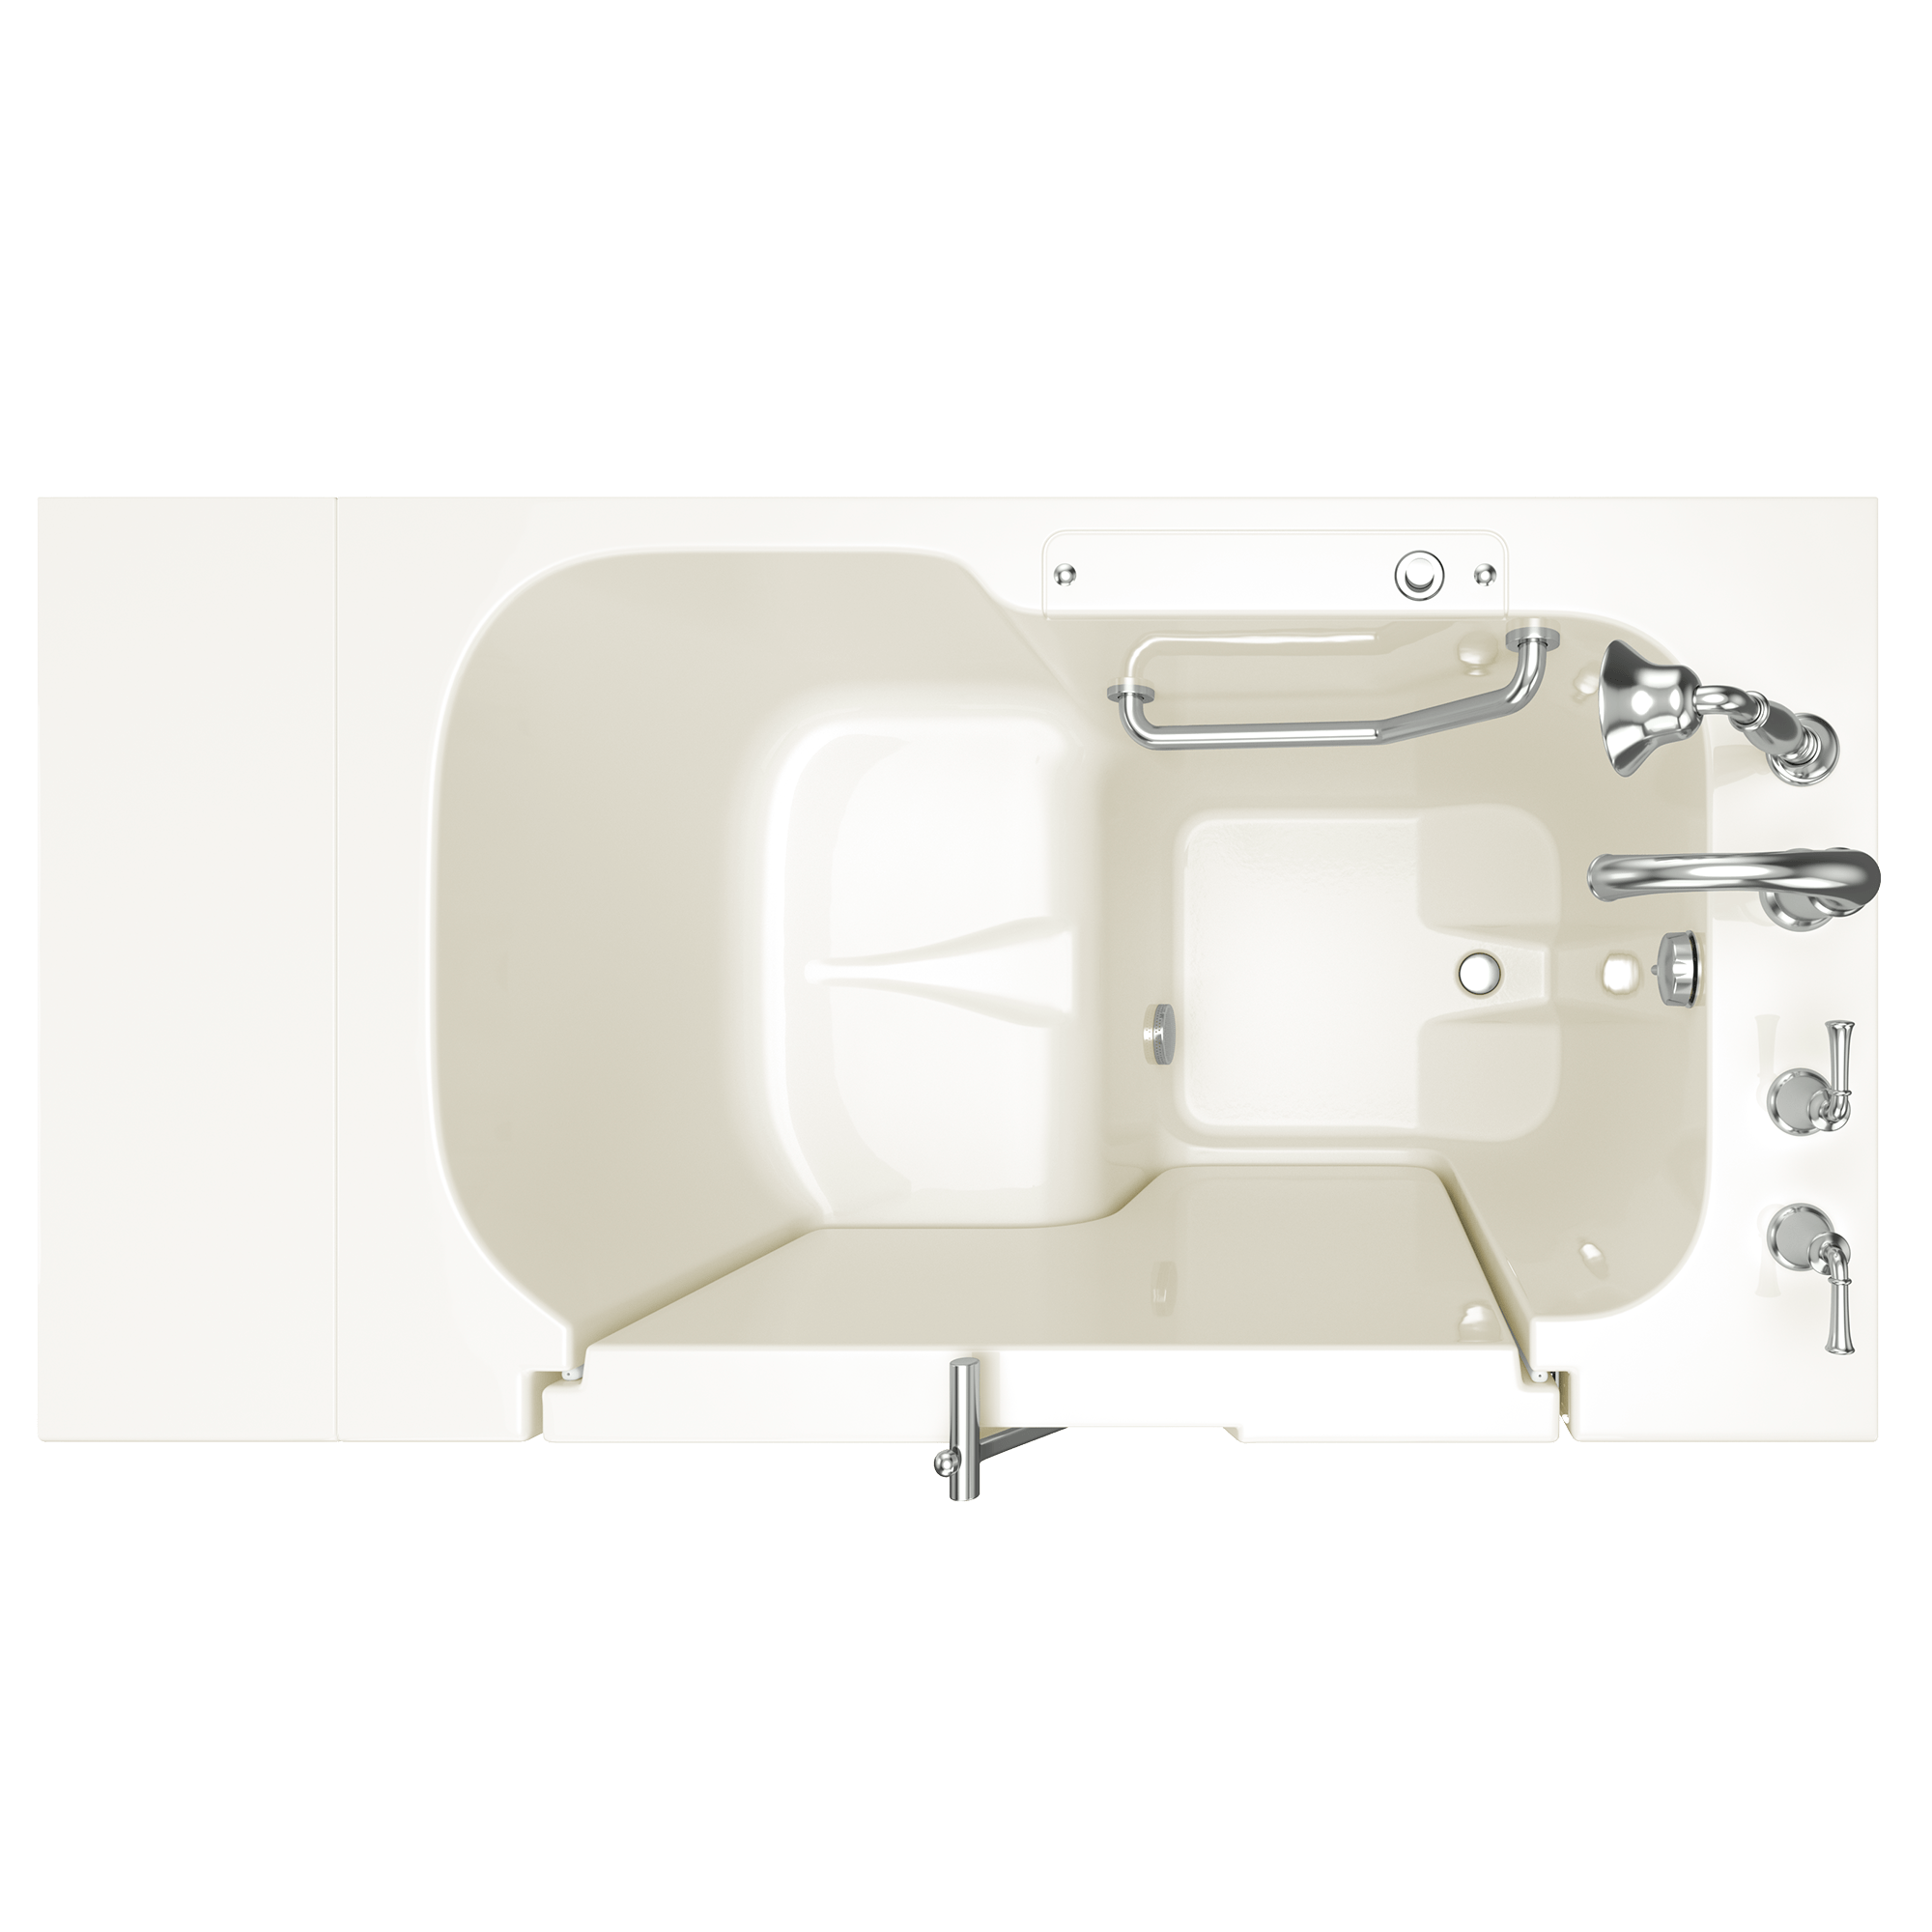 Gelcoat Value Series 32 x 52  Inch Walk in Tub With Soaker System   Right Hand Drain With Faucet WIB LINEN